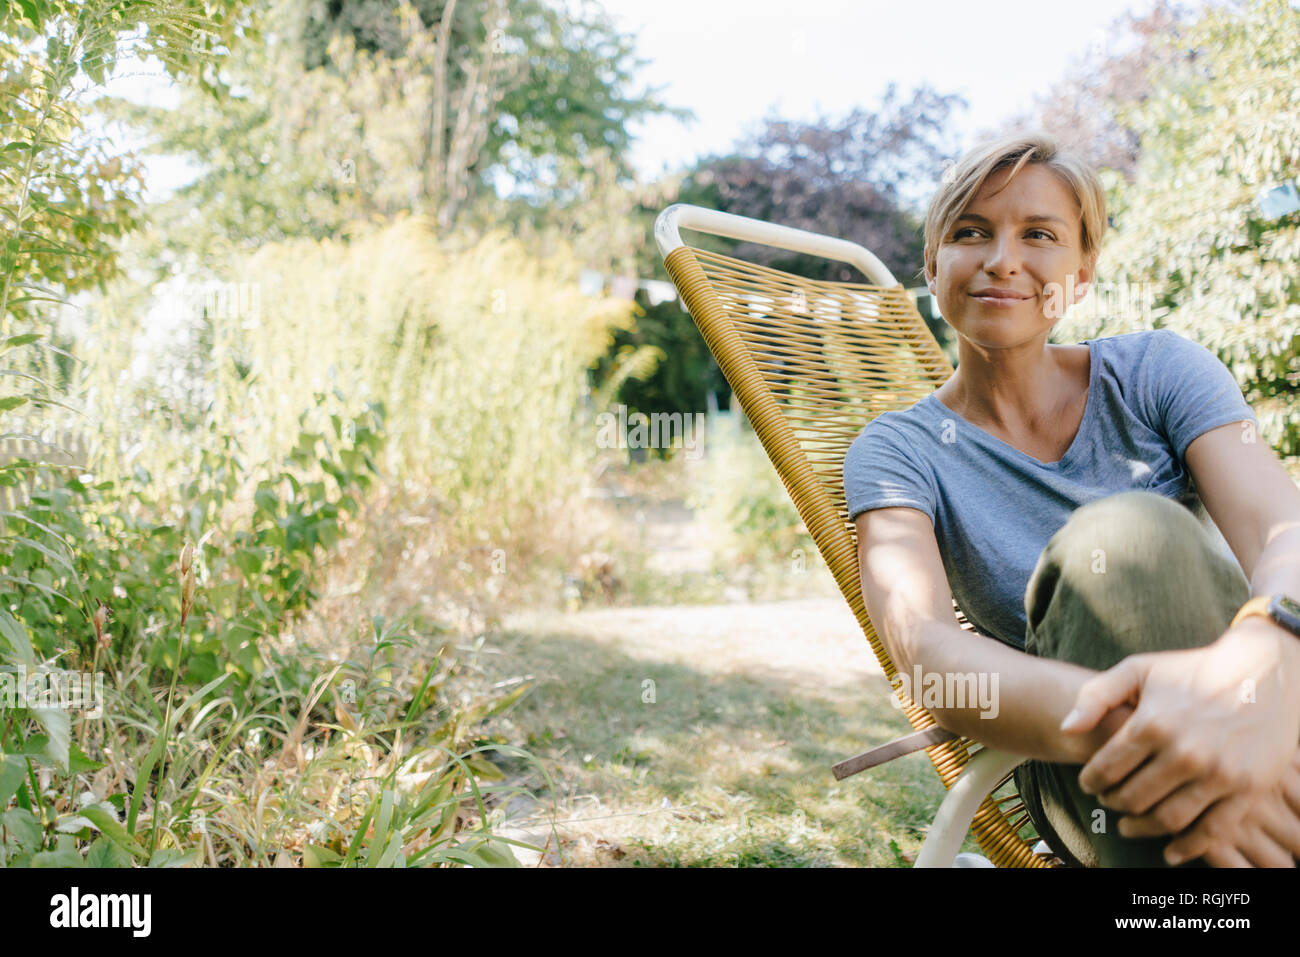 Woman sitting in garden on chair Stock Photo